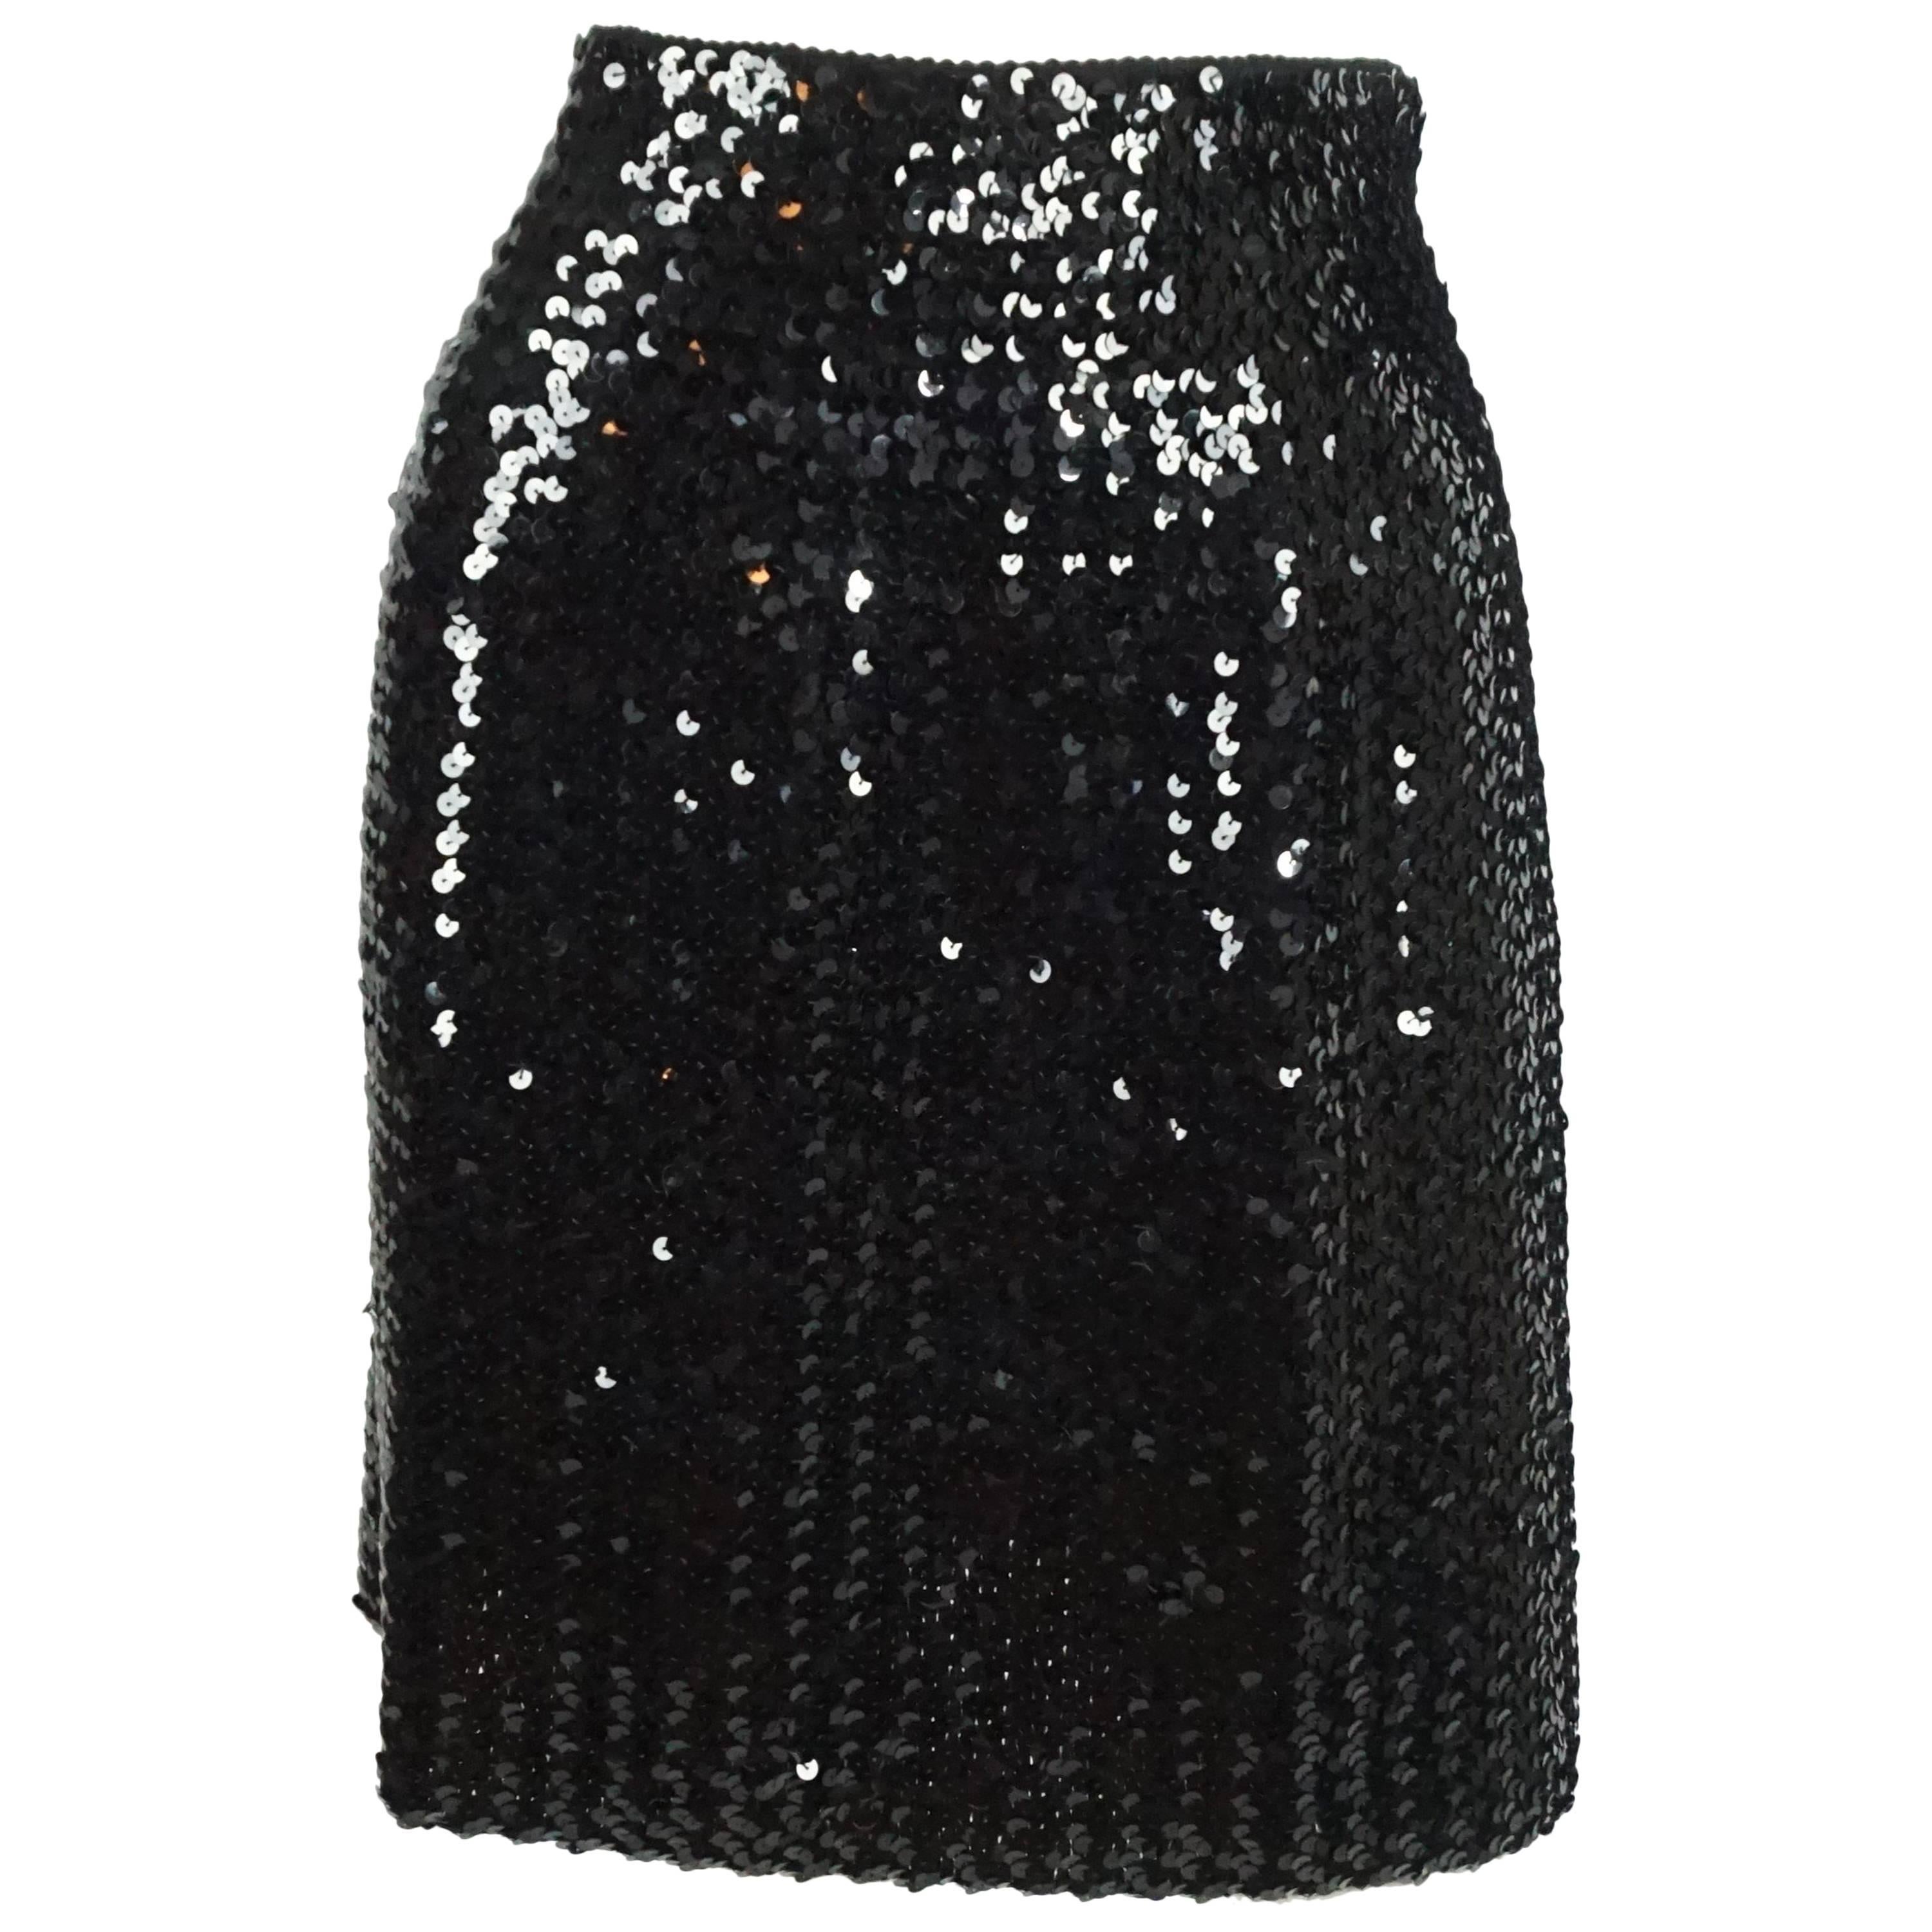 Todd Oldham 1990's Black Sequin Knit Skirt - Size Small For Sale